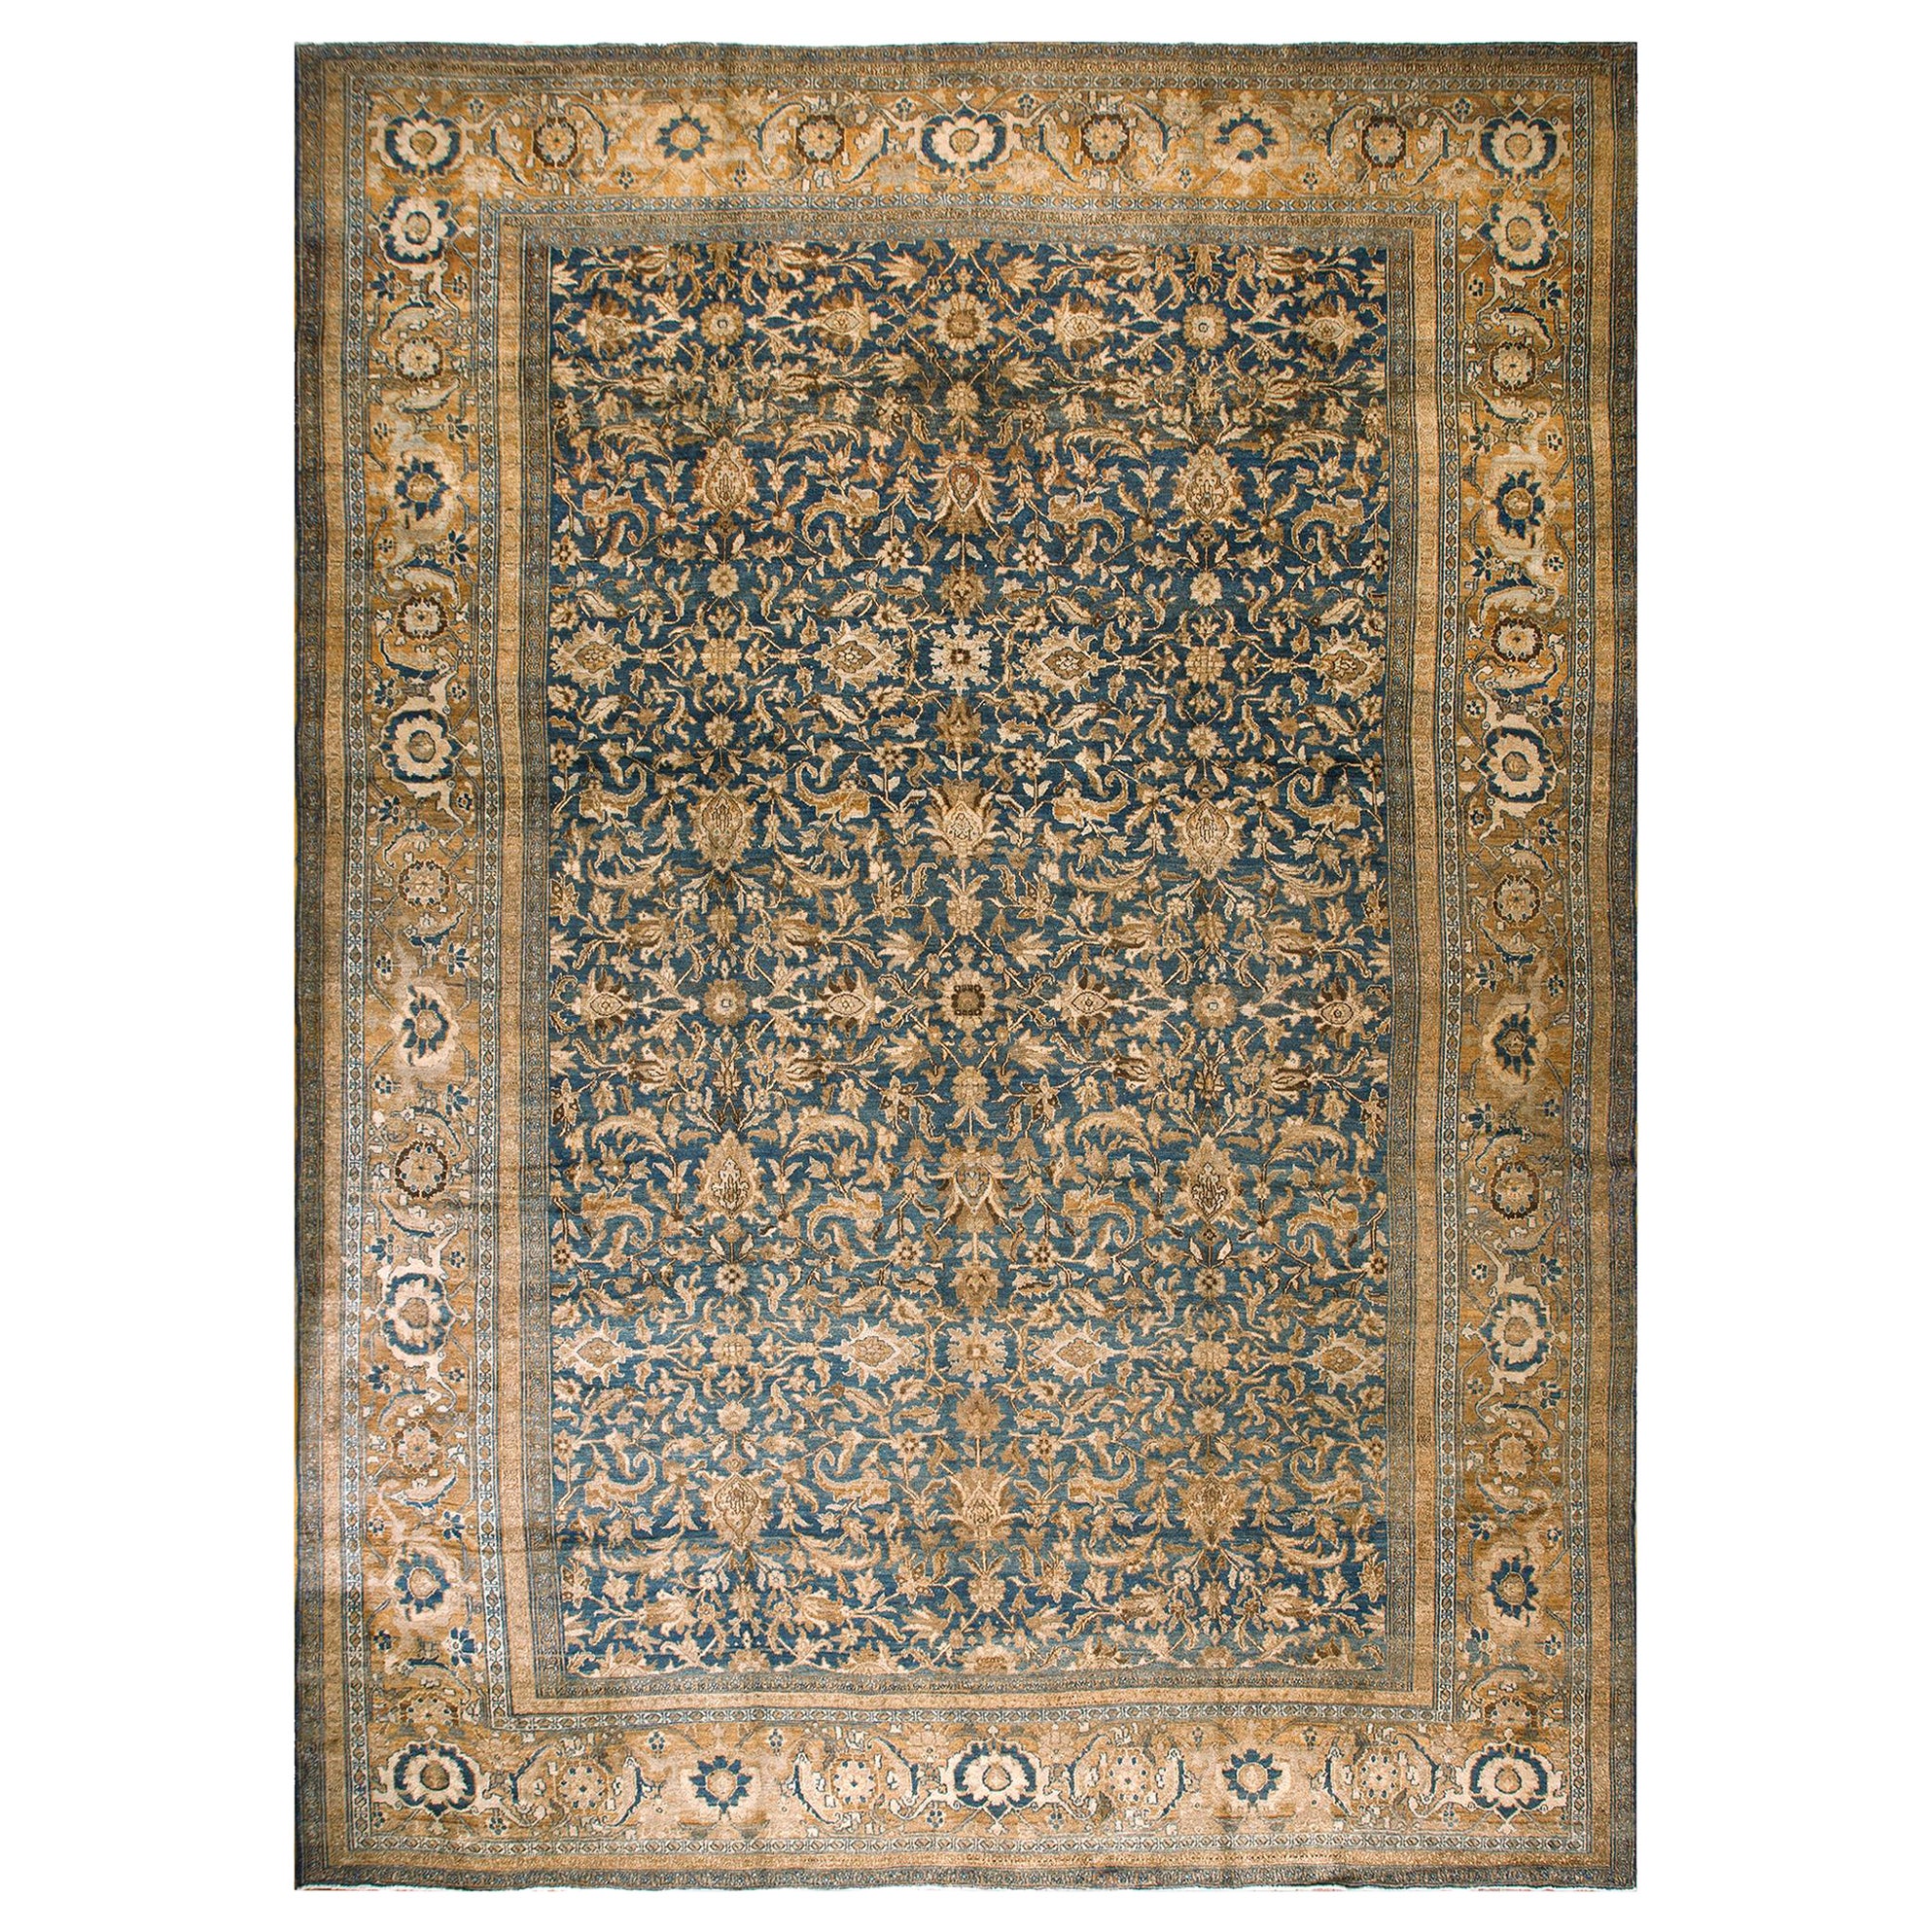 Late 19th Century Persian Bibikabad Carpet ( 12'5" x 17'5" - 378 x 530 ) For Sale